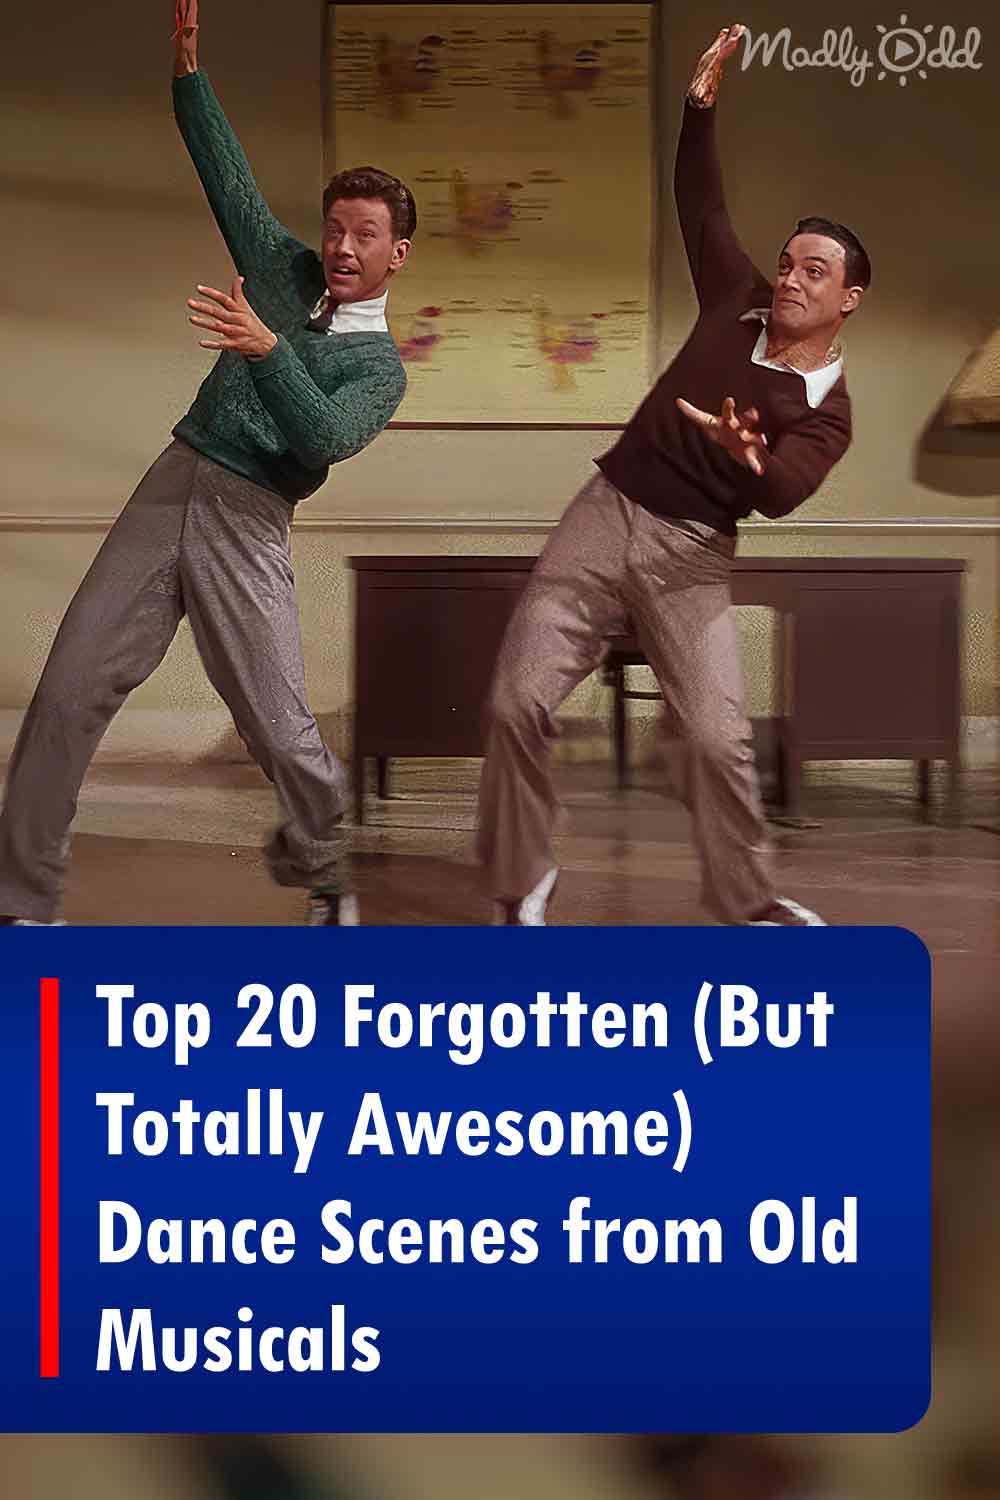 Top 20 Forgotten (But Totally Awesome) Dance Scenes from Old Musicals